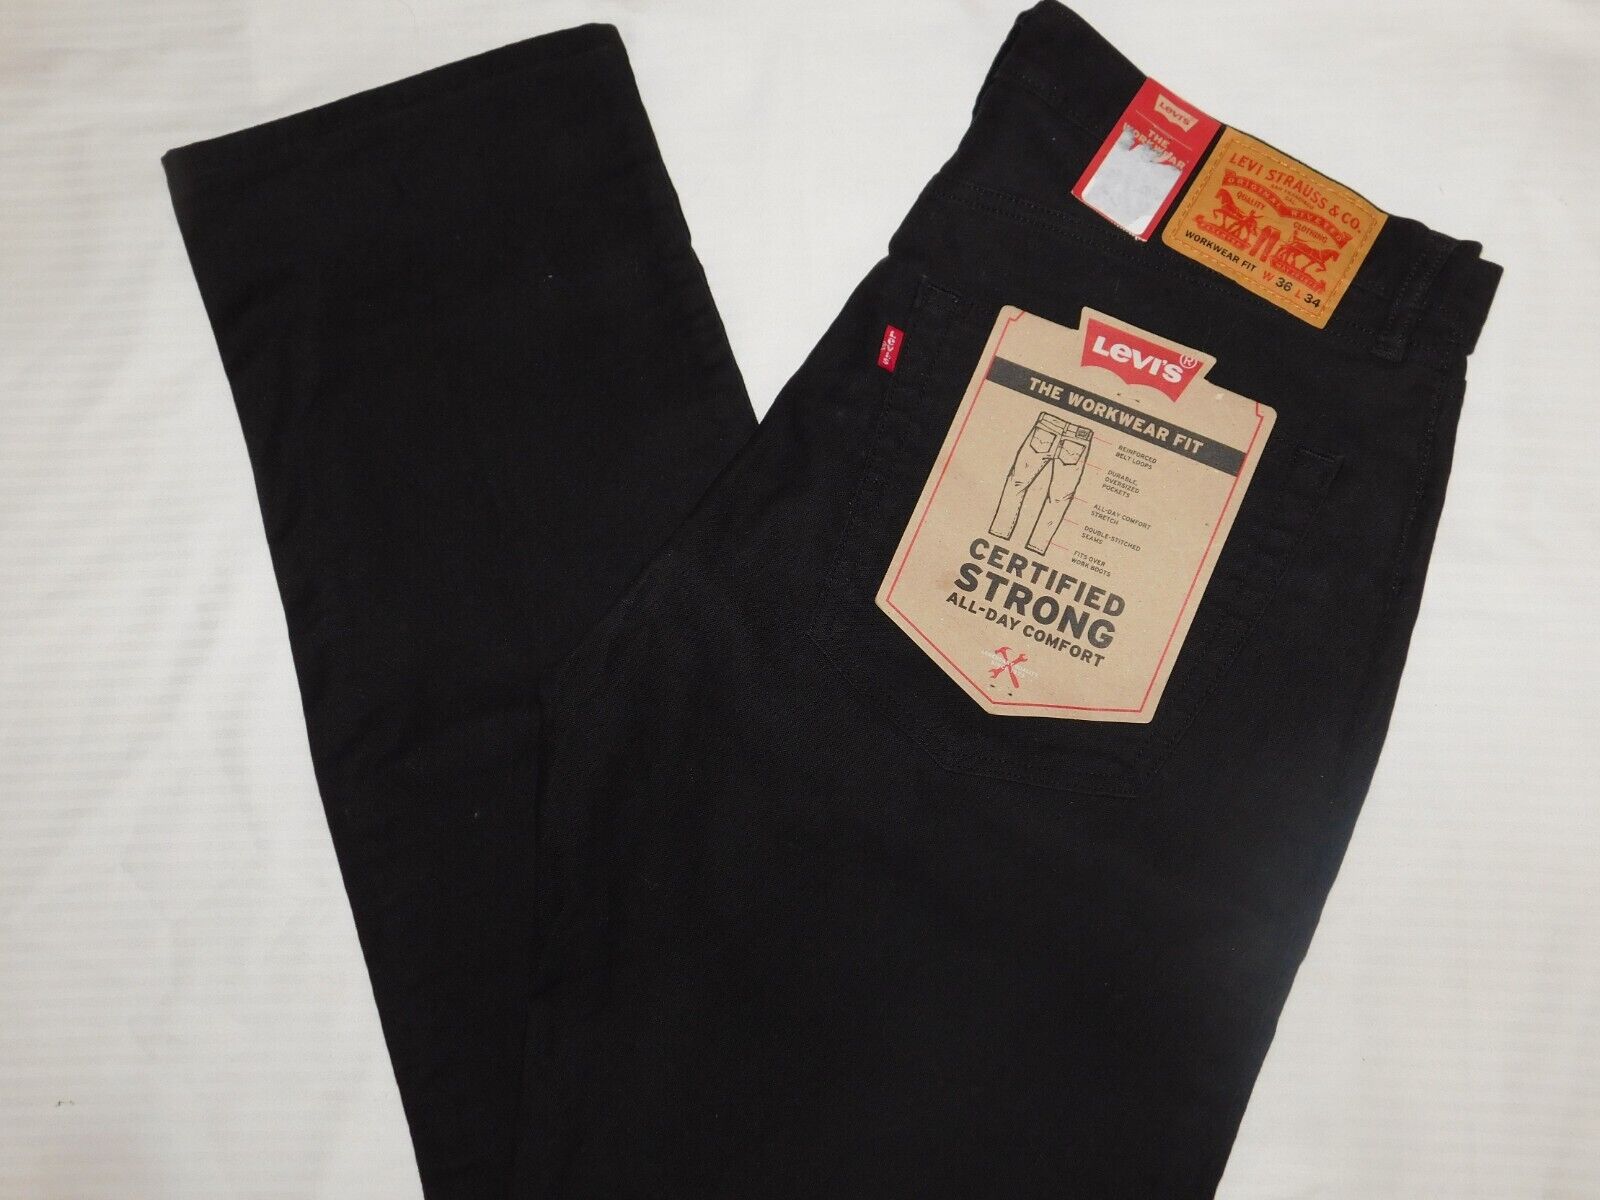 LEVIS Workwear Fit Jeans All Day Comfort Stretch Fits Over Work Boots Dark  Black | eBay